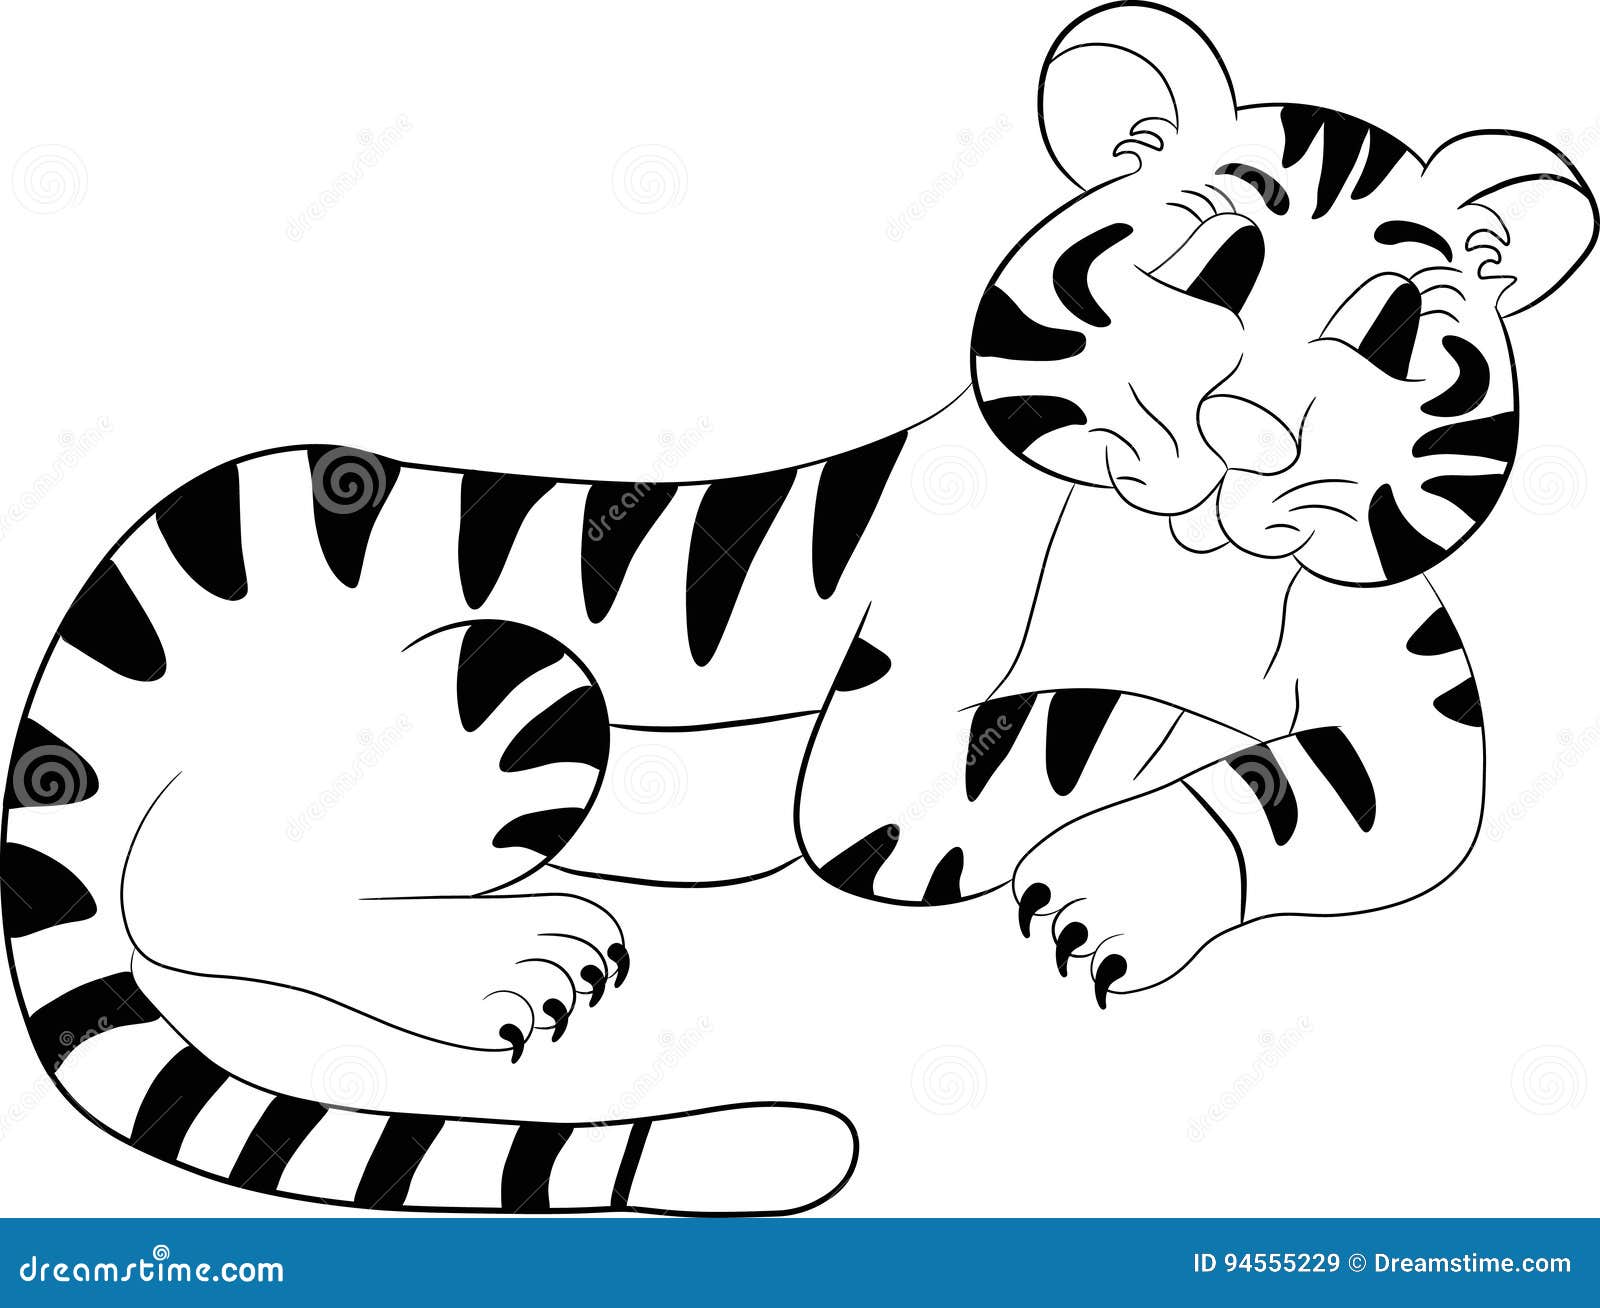 Female tiger stock vector. Illustration of lying, claws ...